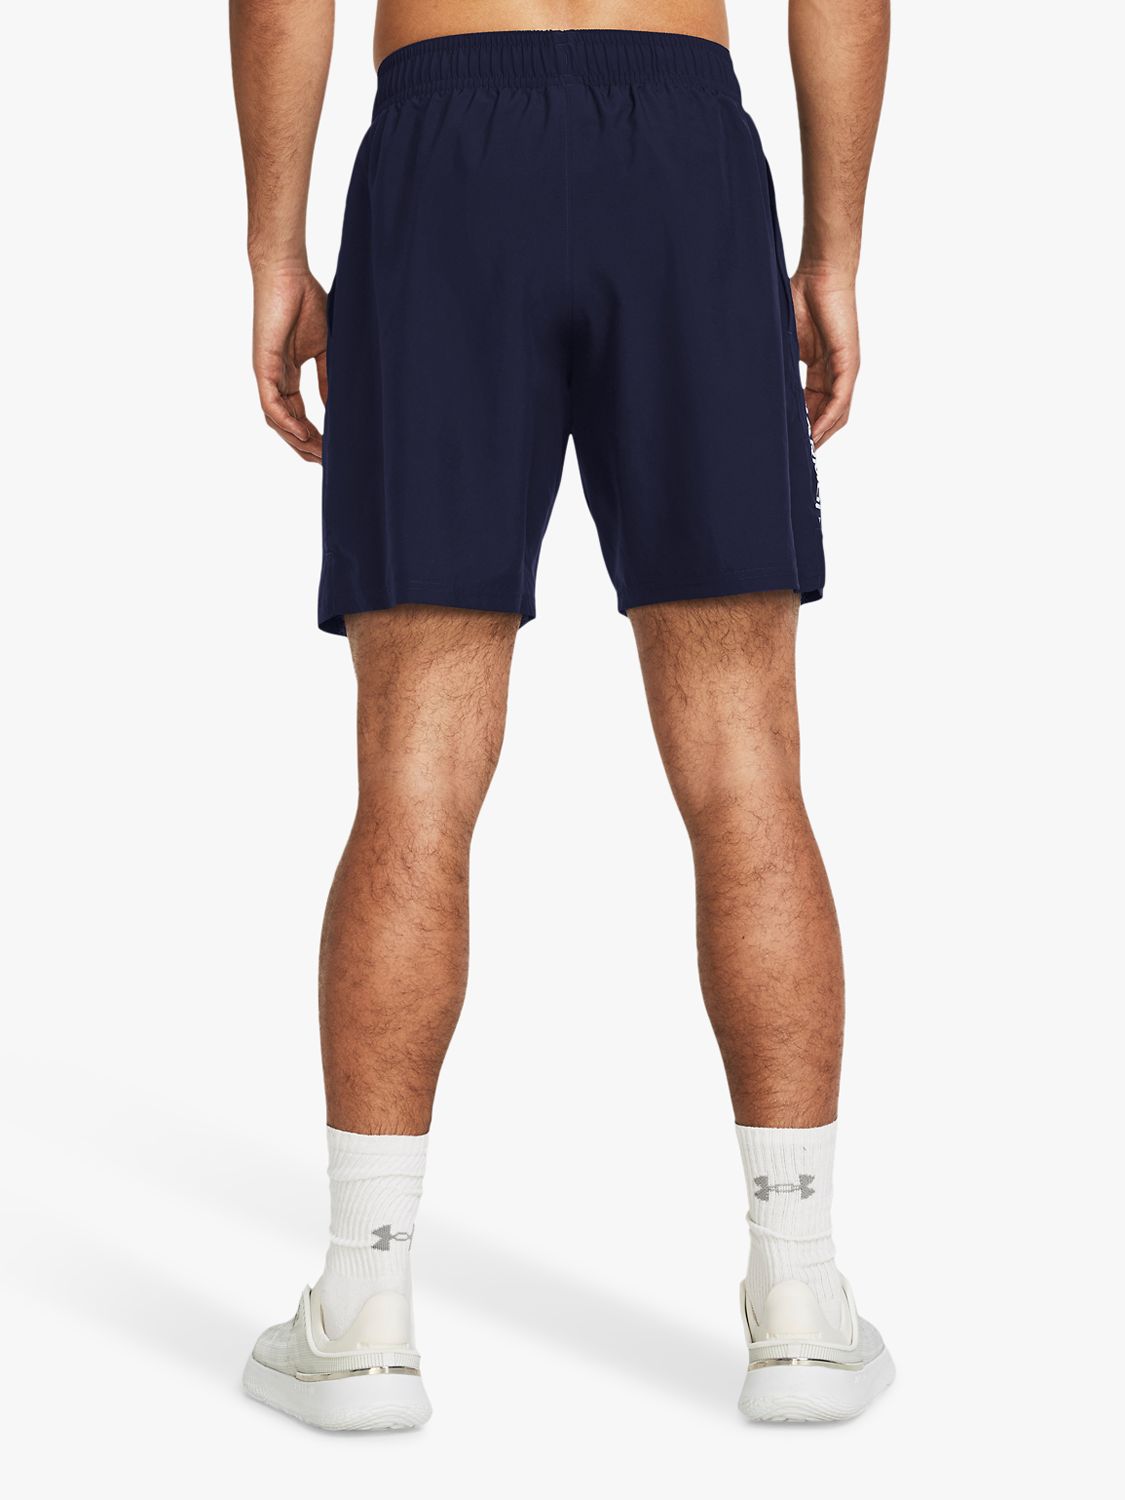 Under Armour Lightweight Woven Shorts, Navy/White, S